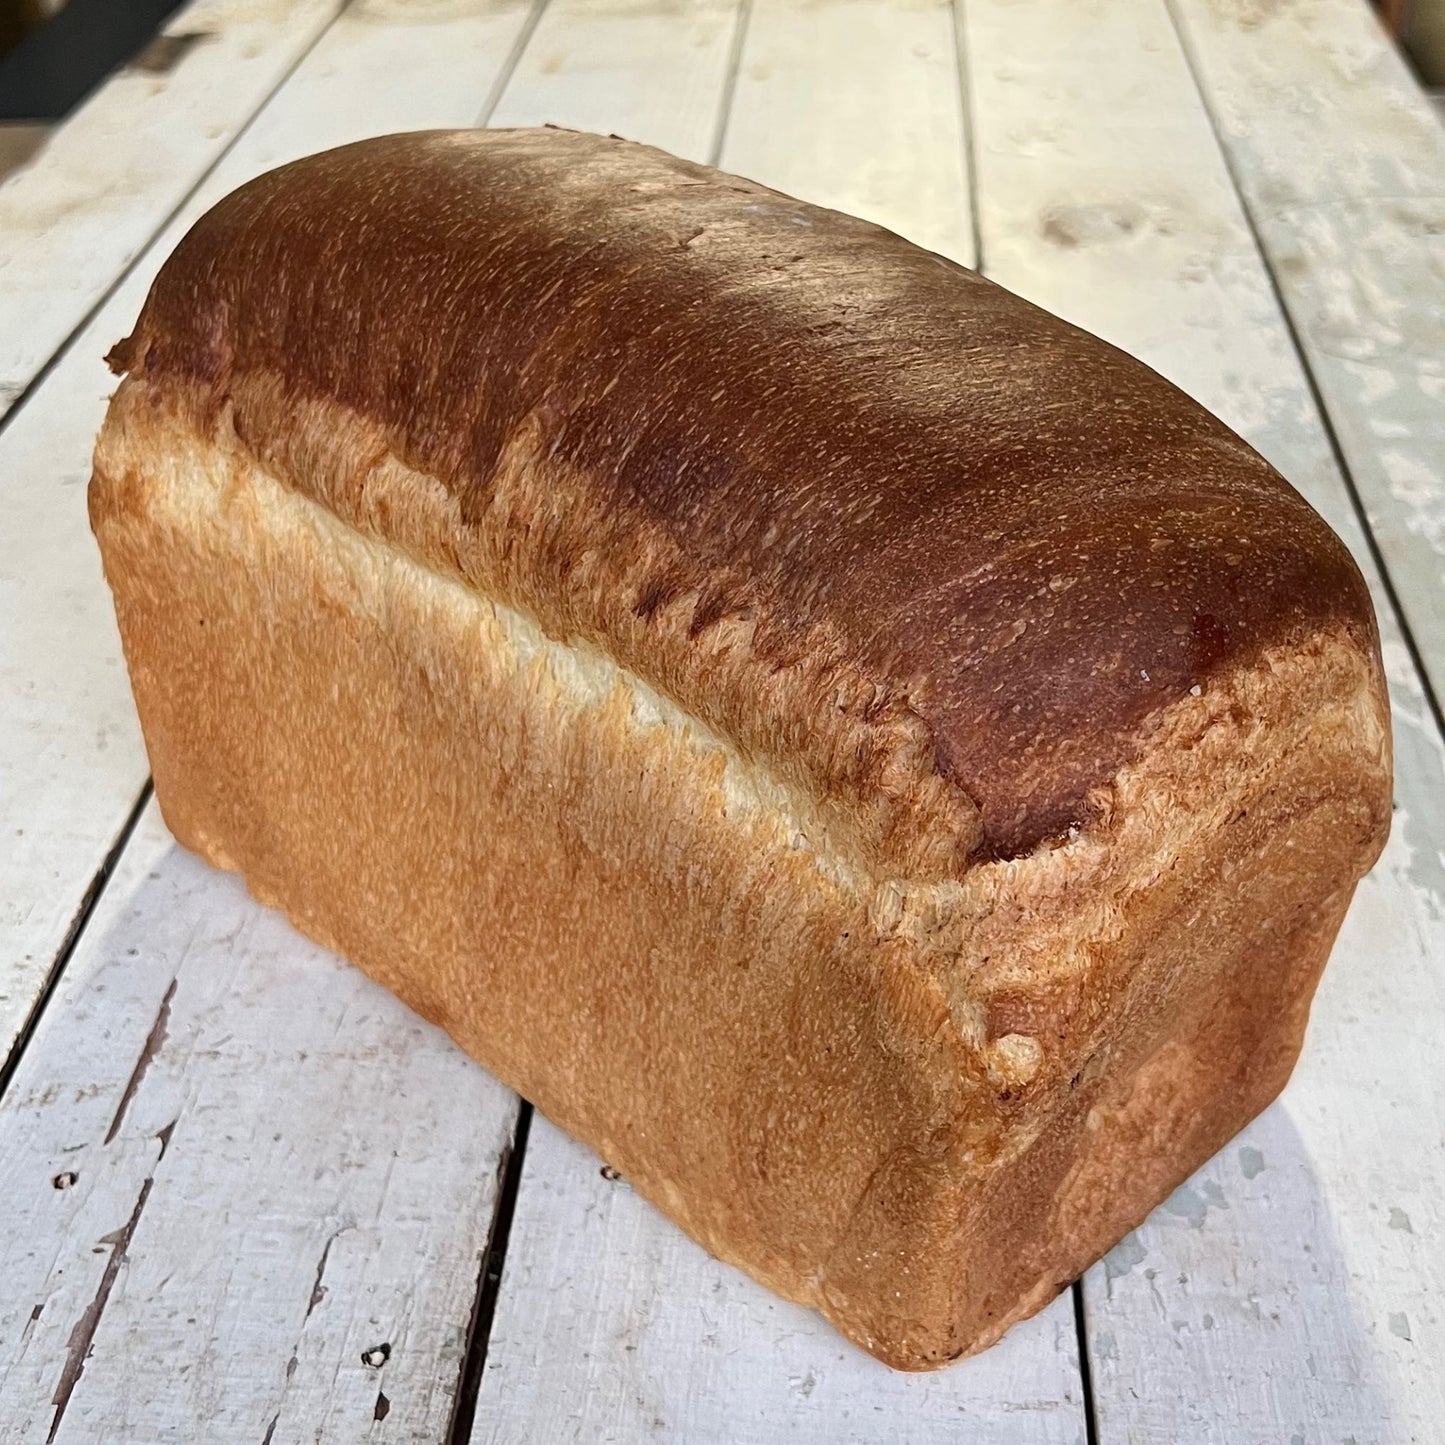 Bread - Classic Hightop white loaf